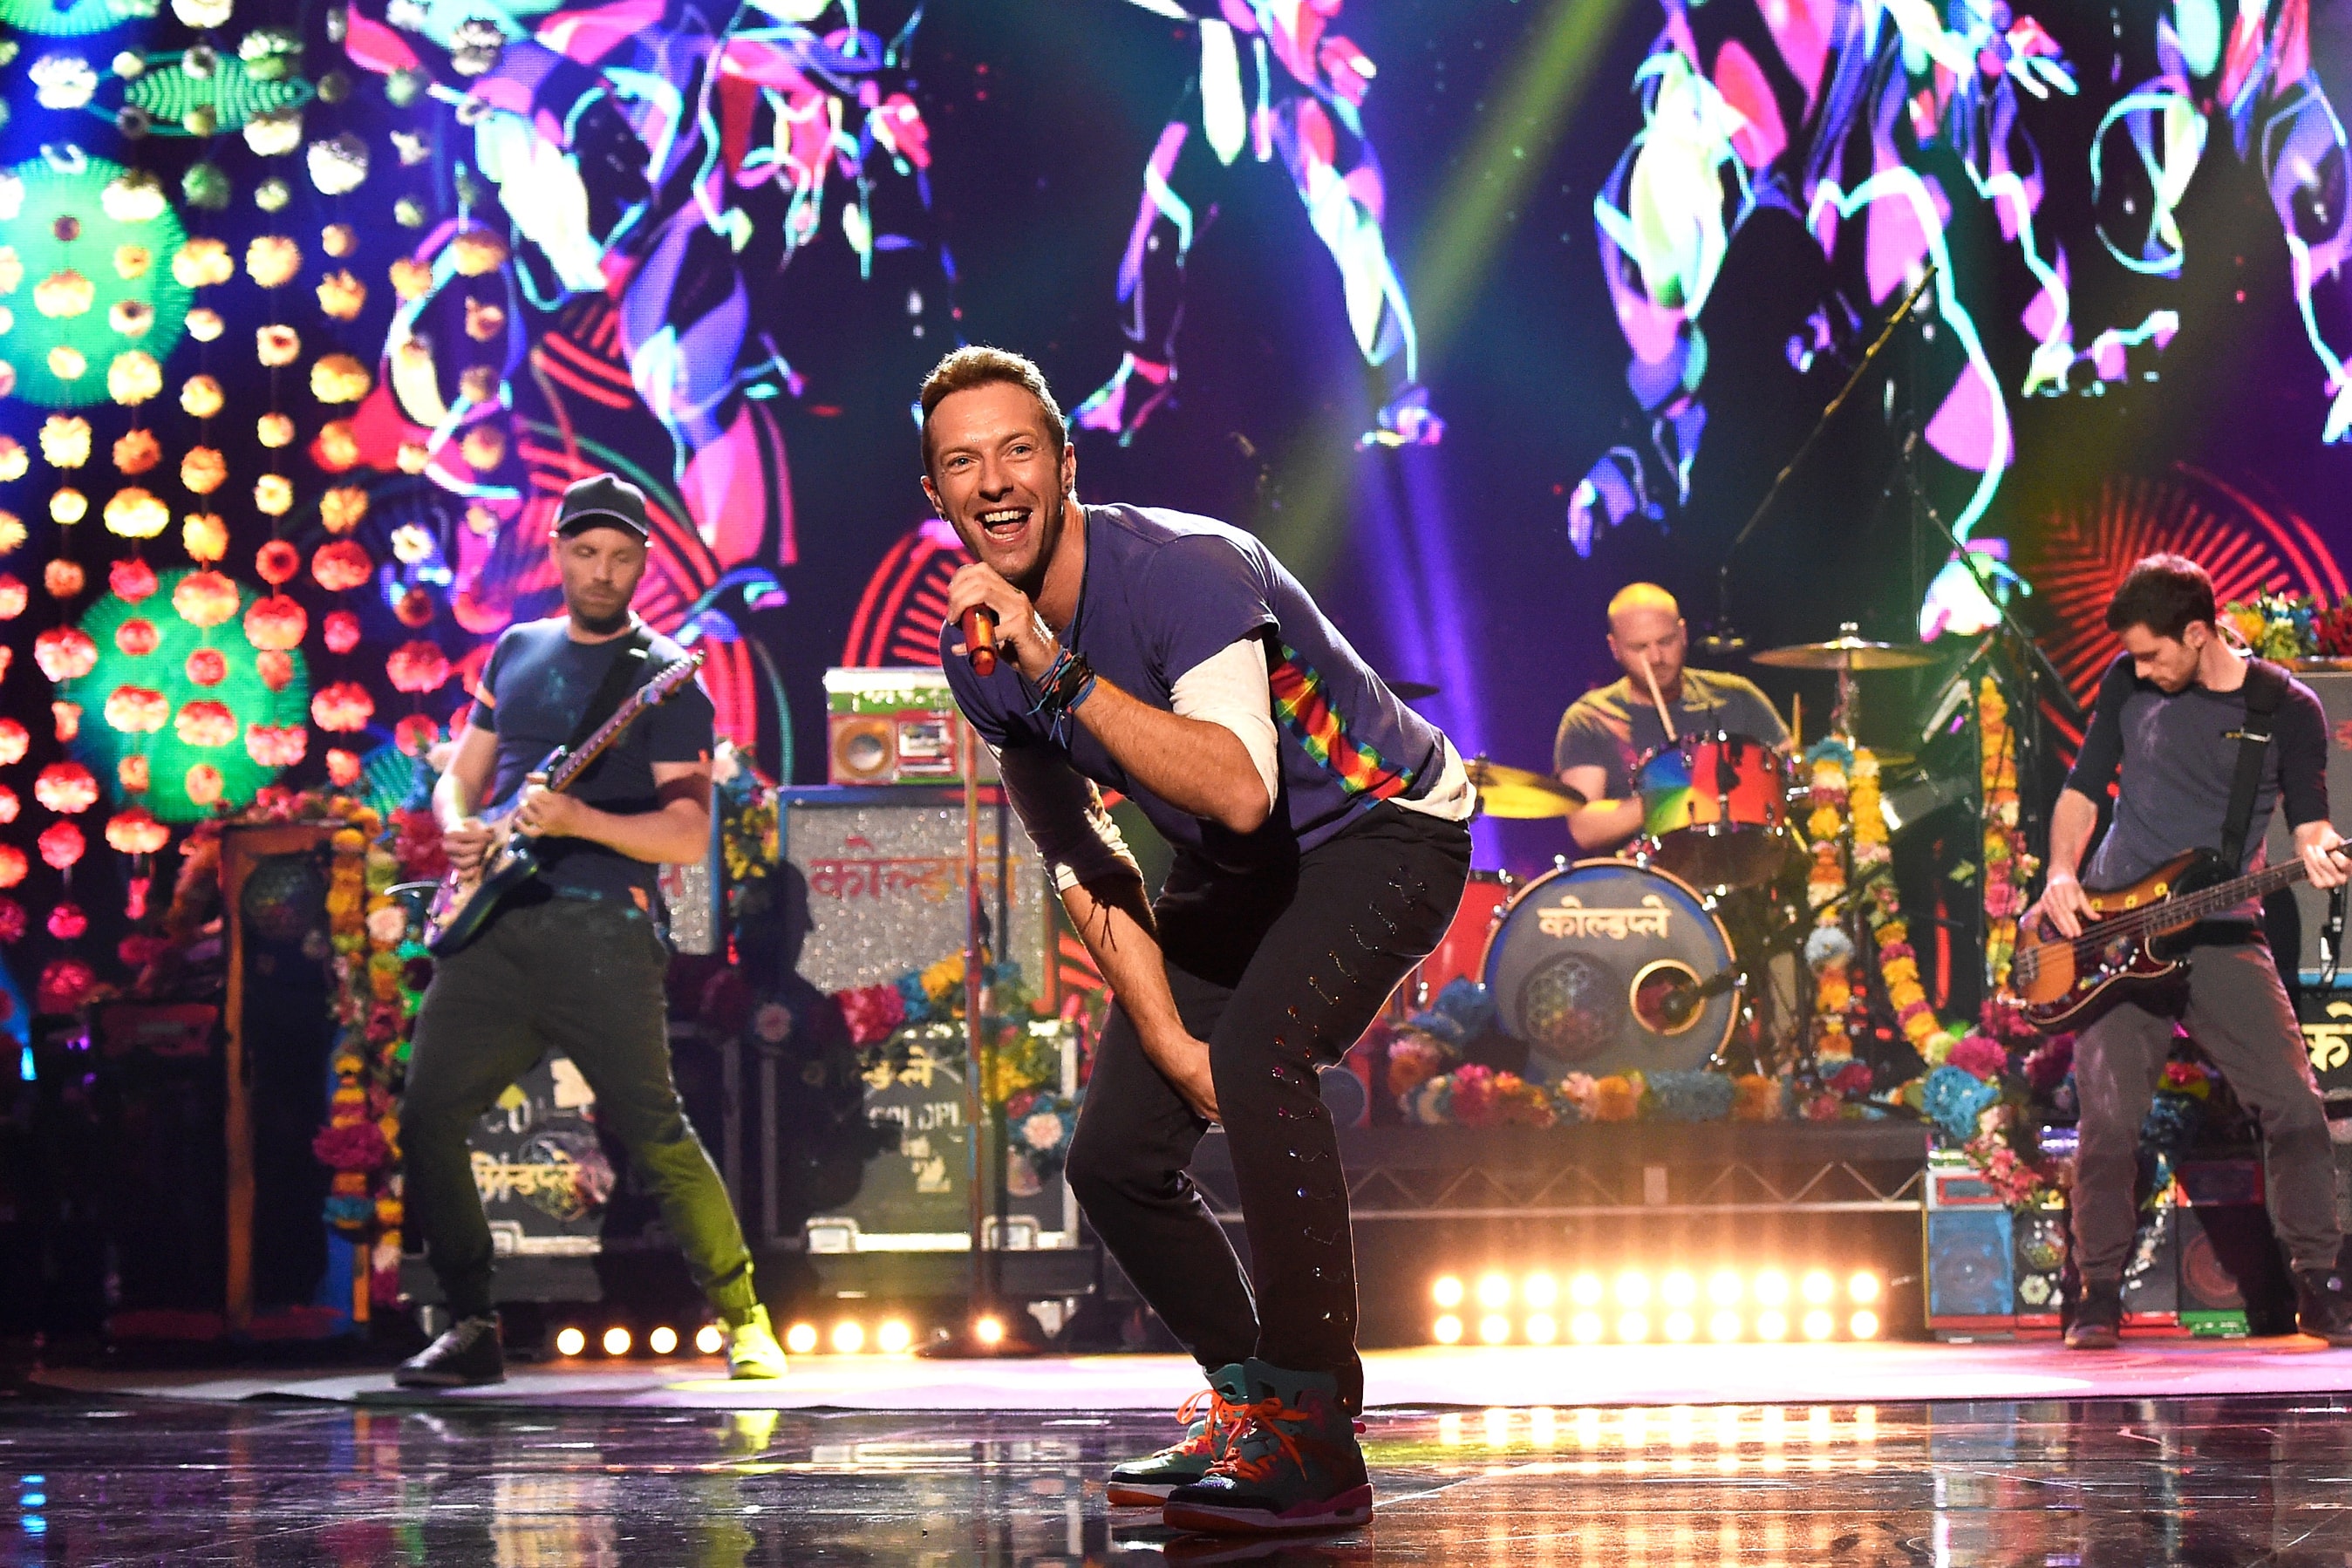 Coldplay announce 2017 Asia tour